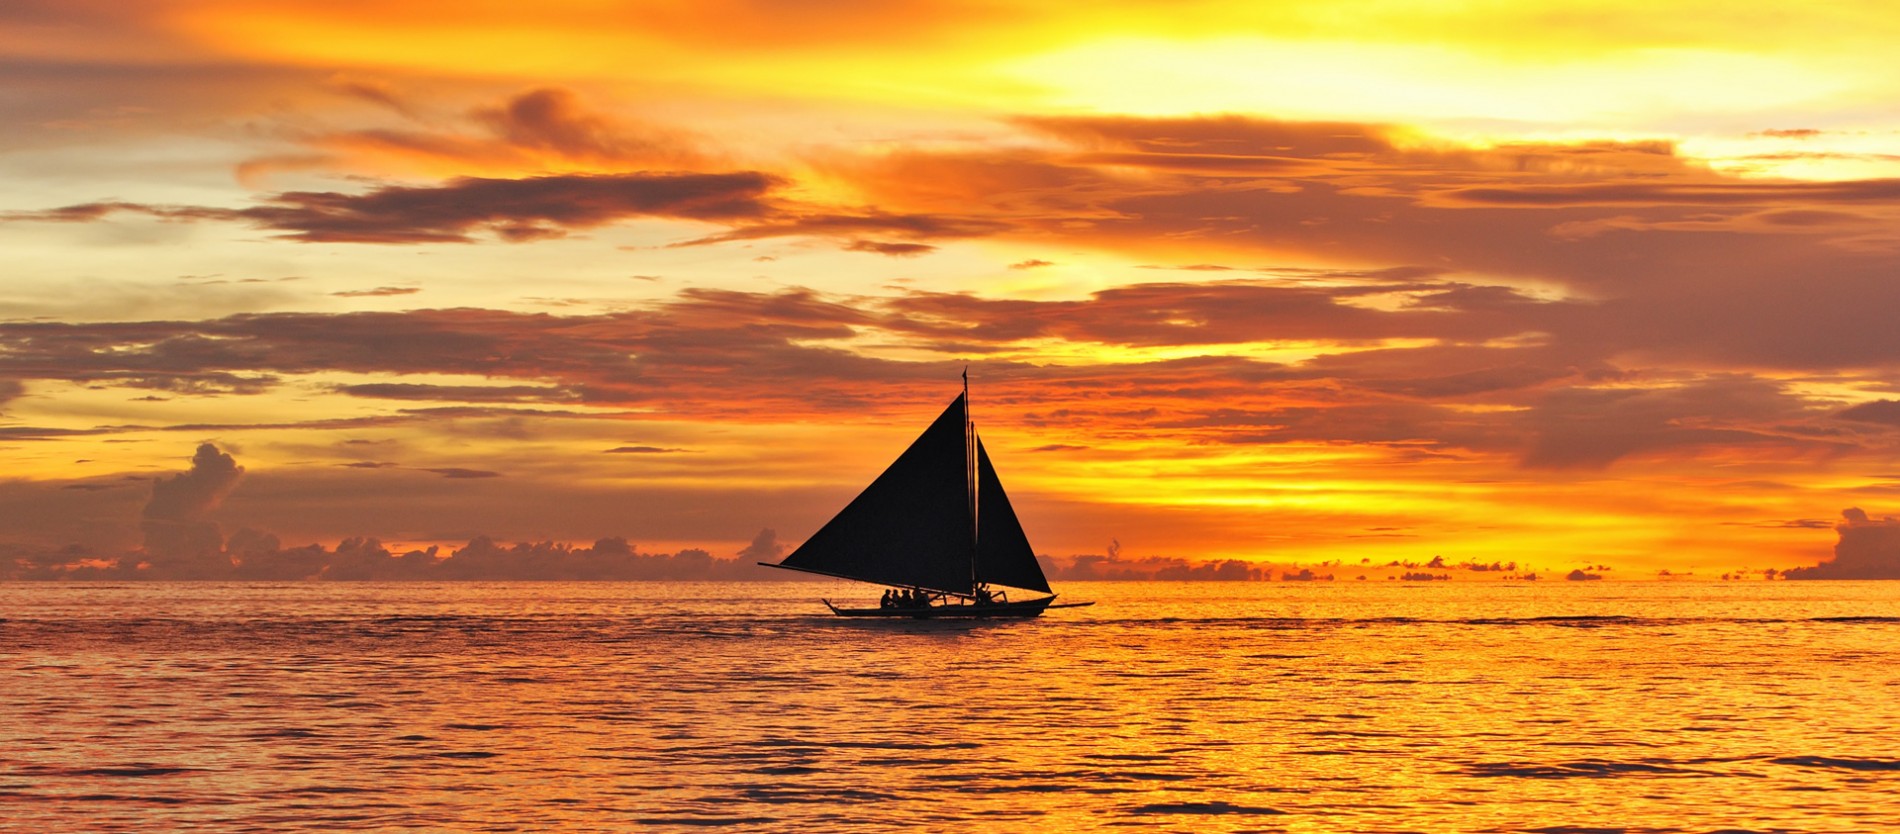 Sailing on the ocean